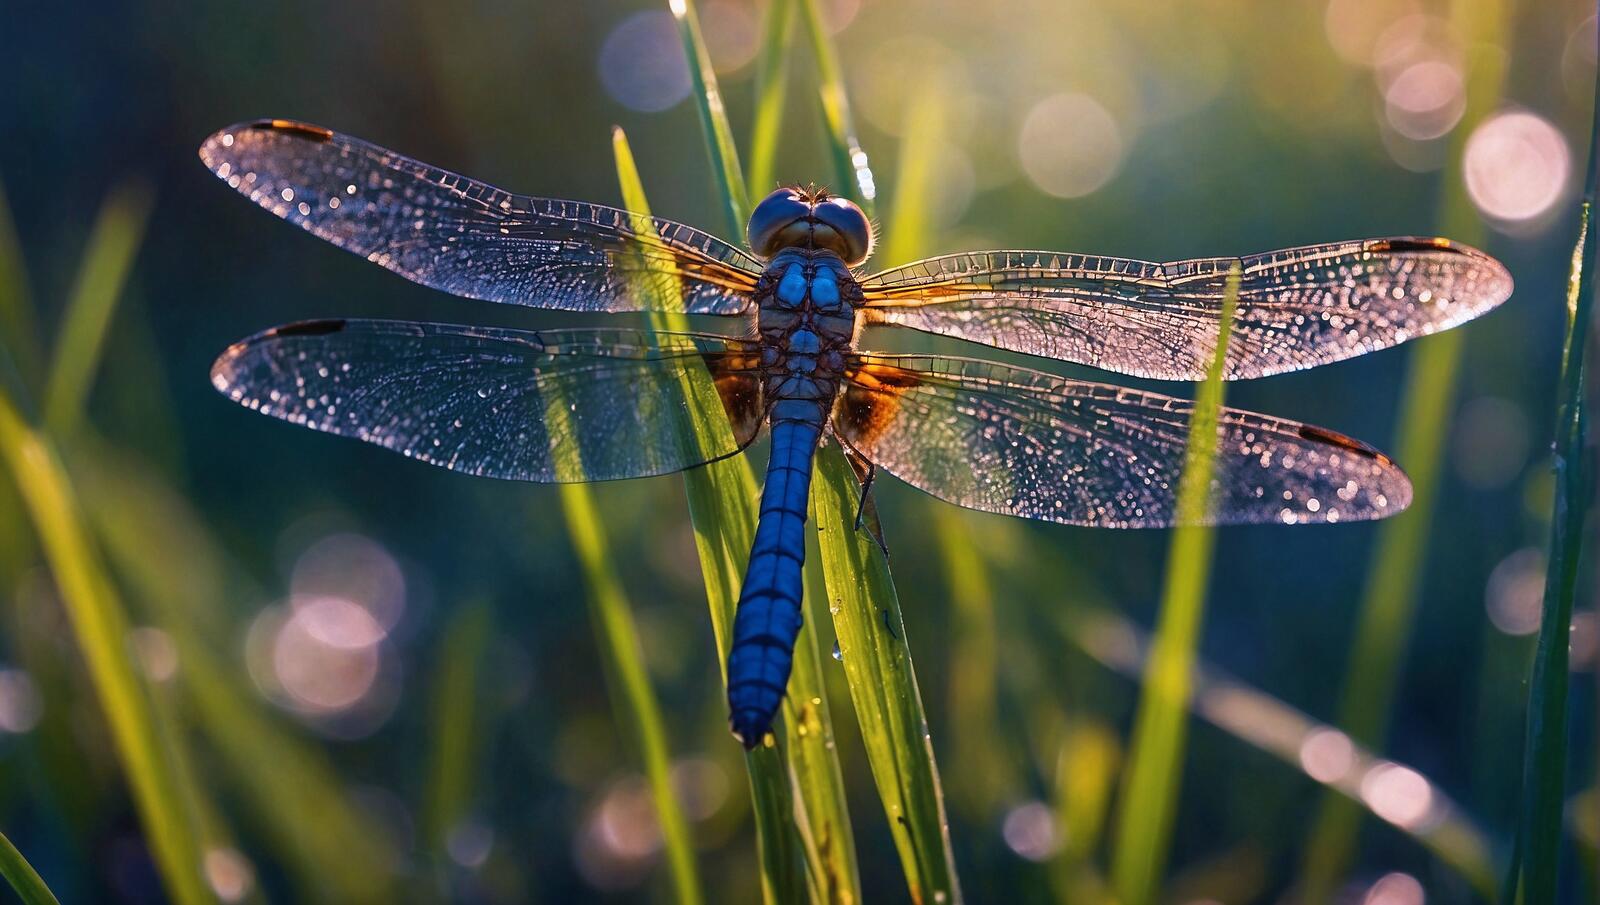 Free photo Close-up of a blue dragon fly on a blade of grass